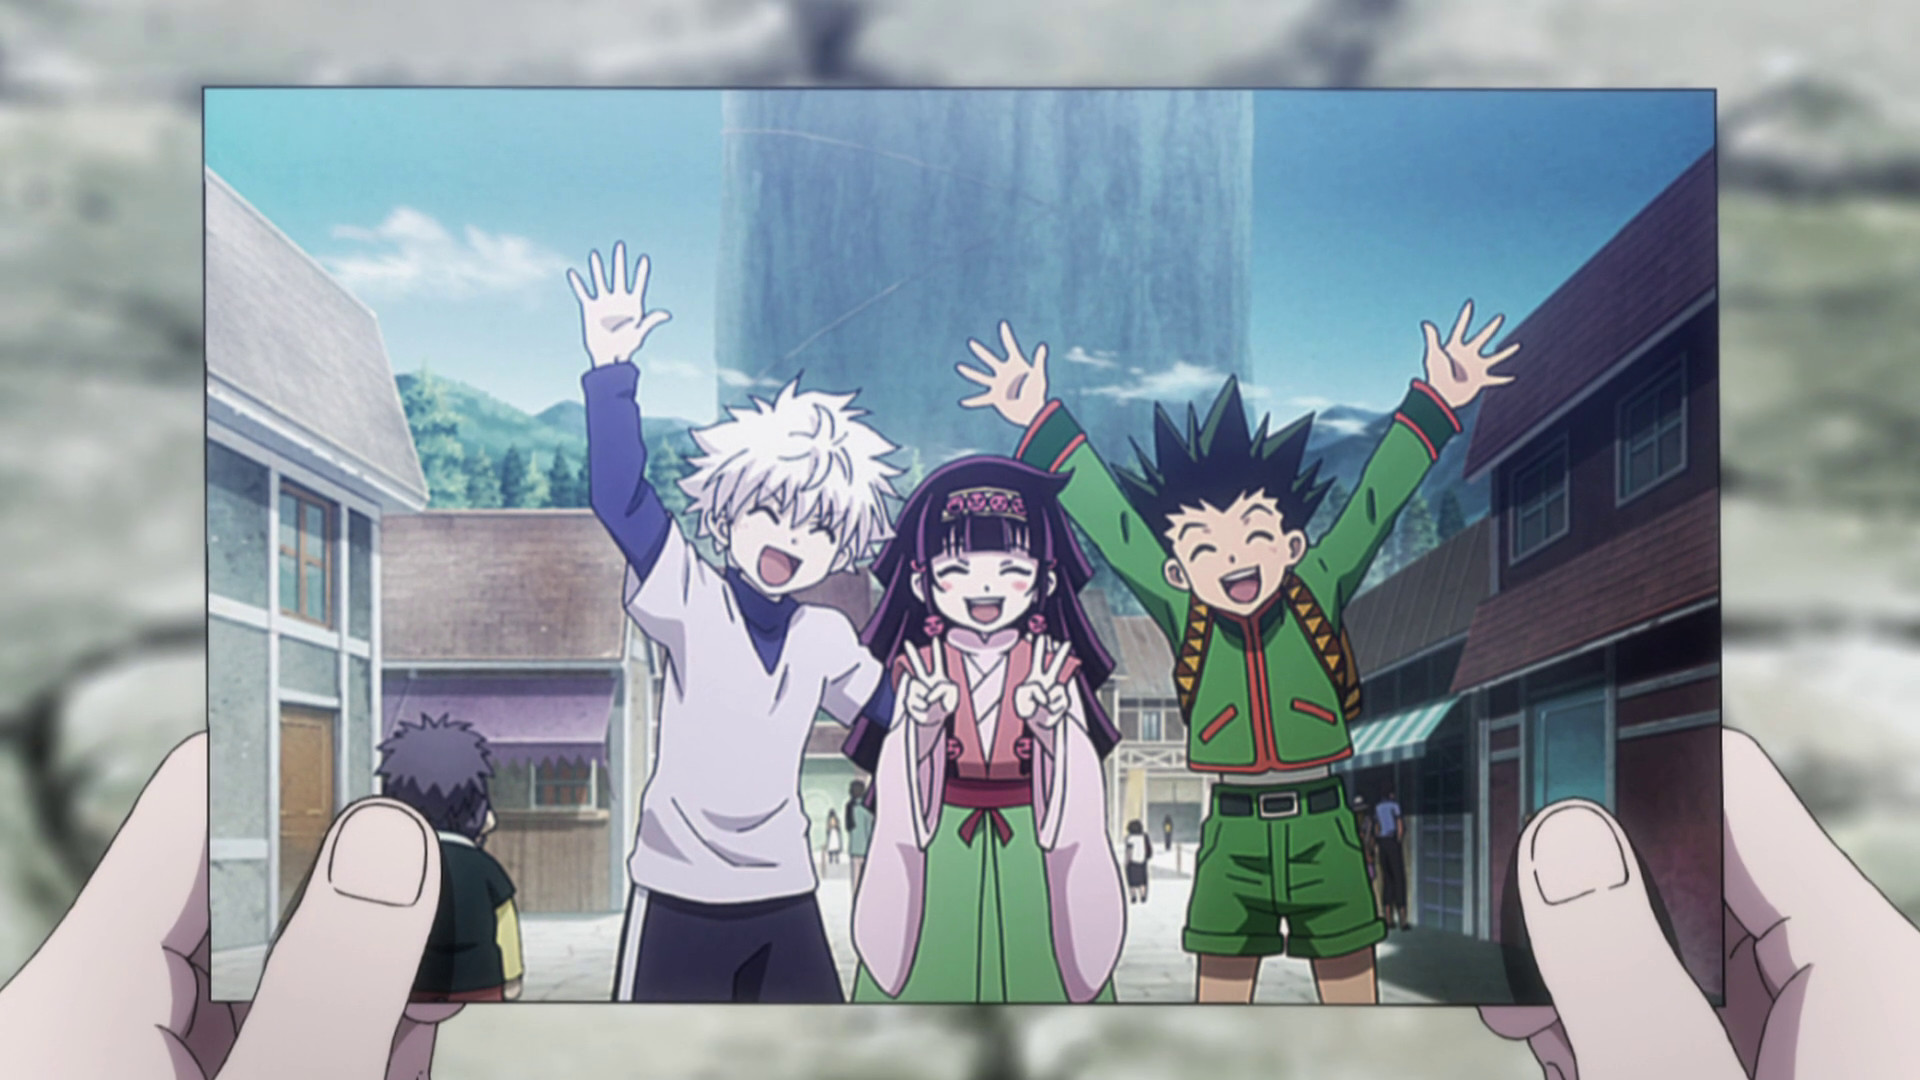 1920x1080 Alluka zoldyck images Alluka and Kilua and Gon HD wallpaper and background  photos